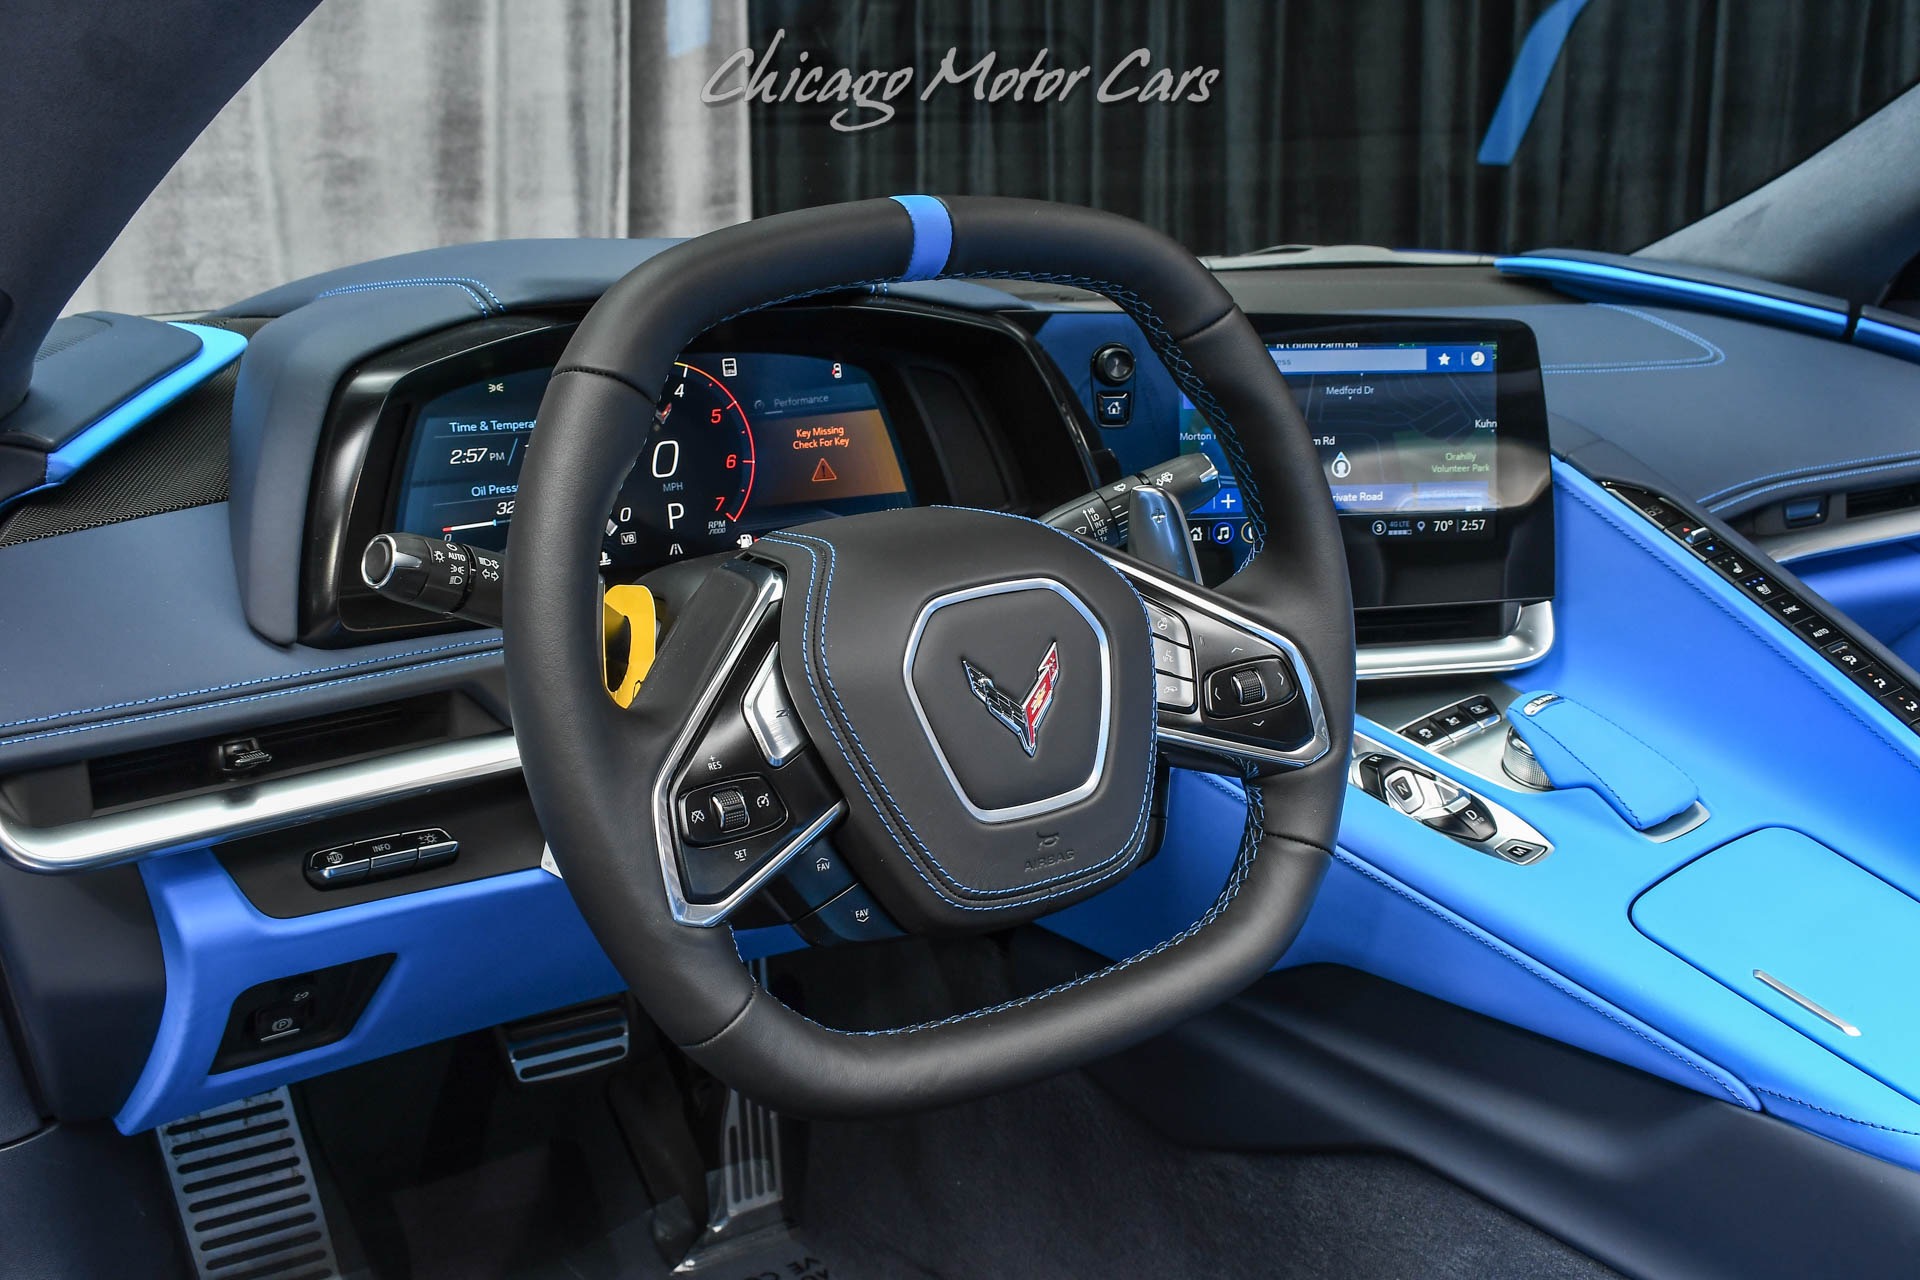 Used-2022-Chevrolet-Corvette-Stingray-3LT-Z51-Convertible-Front-Lift-Stunning-Color-Combo-Front-PPF